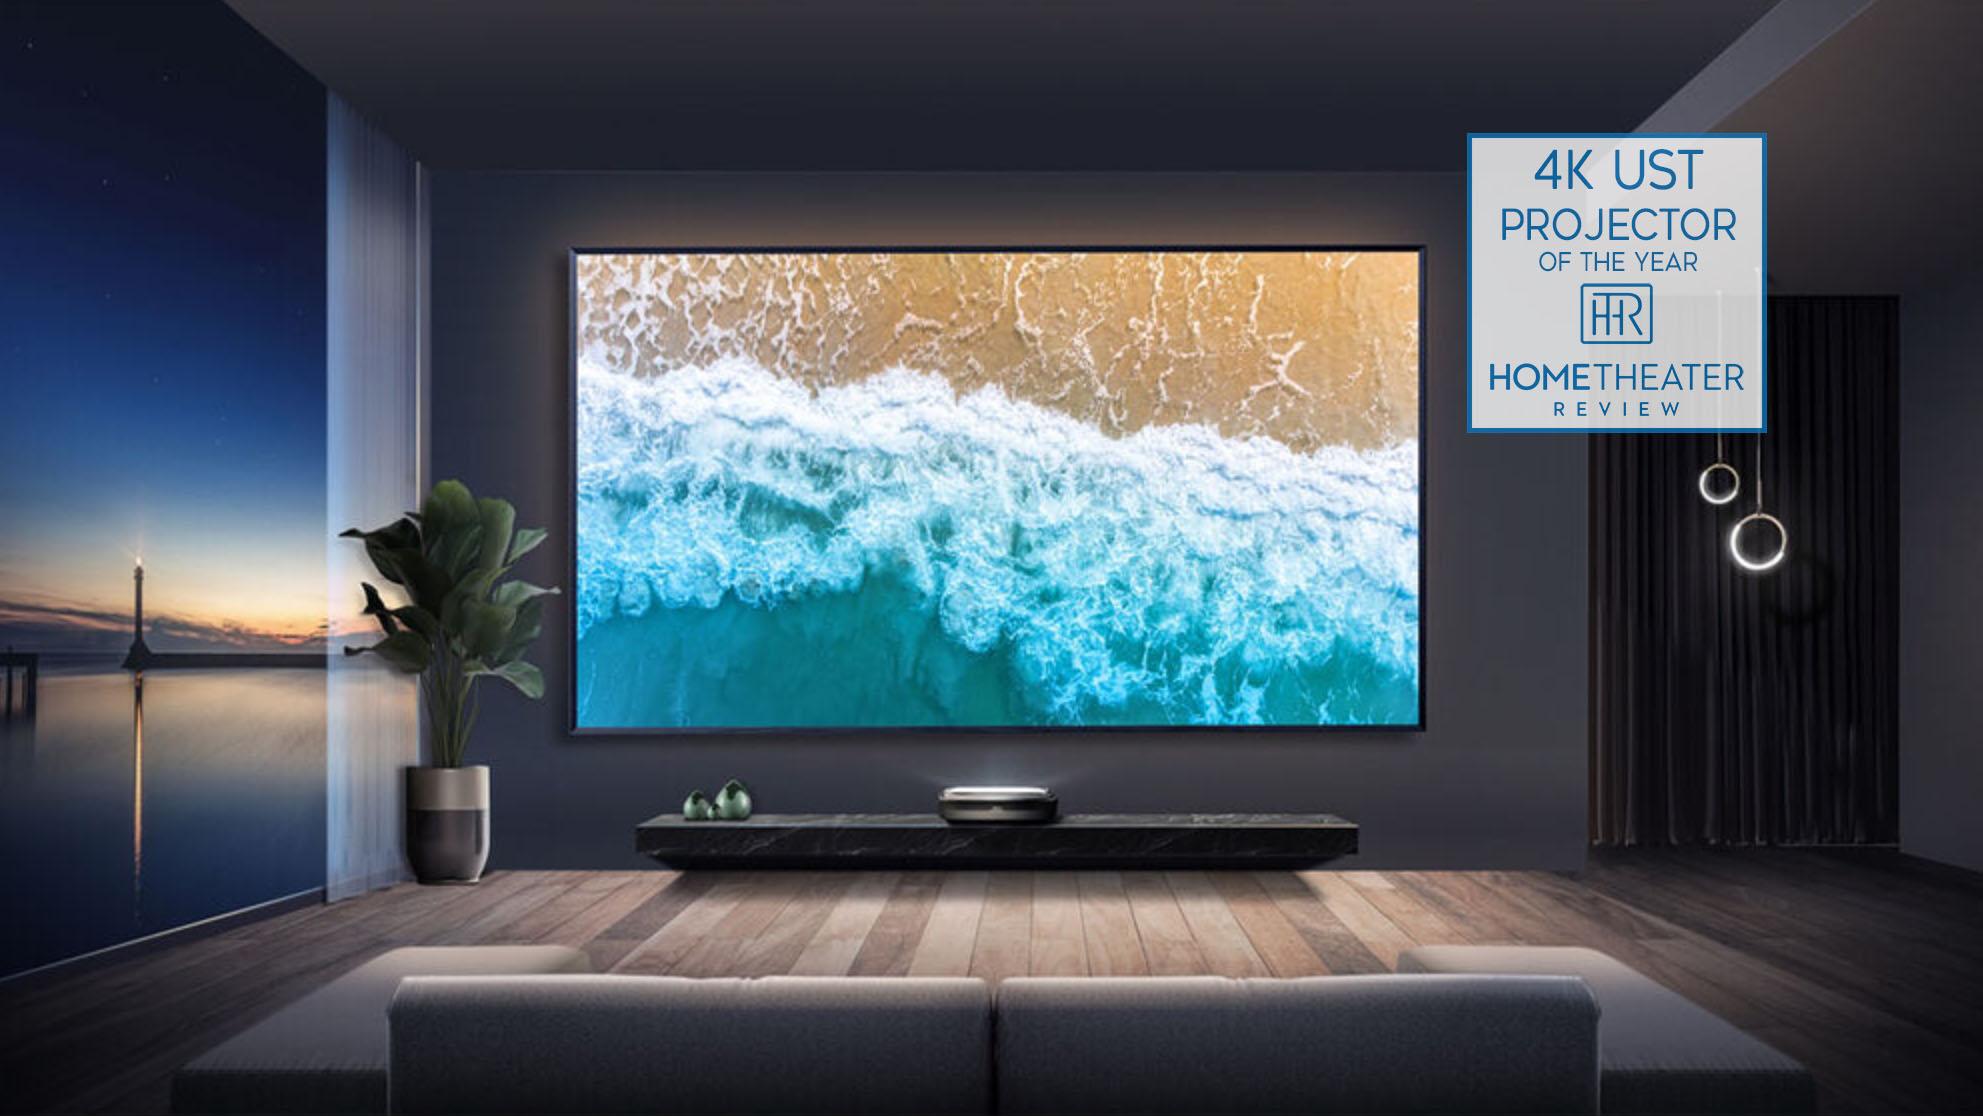 The Hisense L9G is a standout performer in a fast-growing and competitive category of ultra-short-throw home projection. 7dc13544 hisense l9g htr 4k uht of the year image